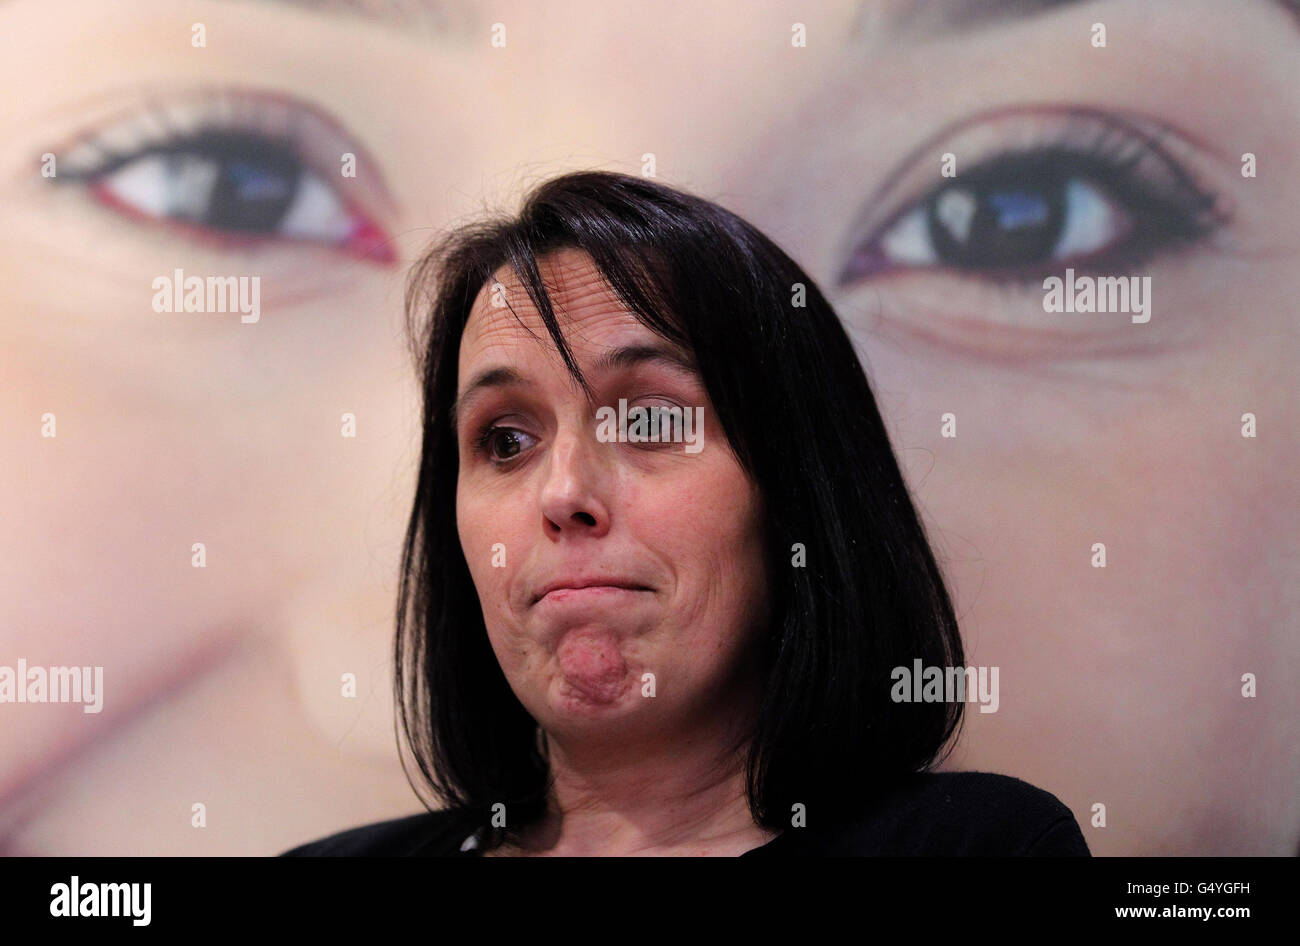 Scottish PiP implant victim Jenny Brown, from Edinburgh during a press conference in Glasgow where she spoke of her recent operation to remove her ruptured PiP implants and urged other people caught up in the affair to come forward. PRESS ASSOCIATION Photo. Picture date: Wednesday February 15, 2012. Photo credit should read: Andrew Milligan/PA Wire Stock Photo